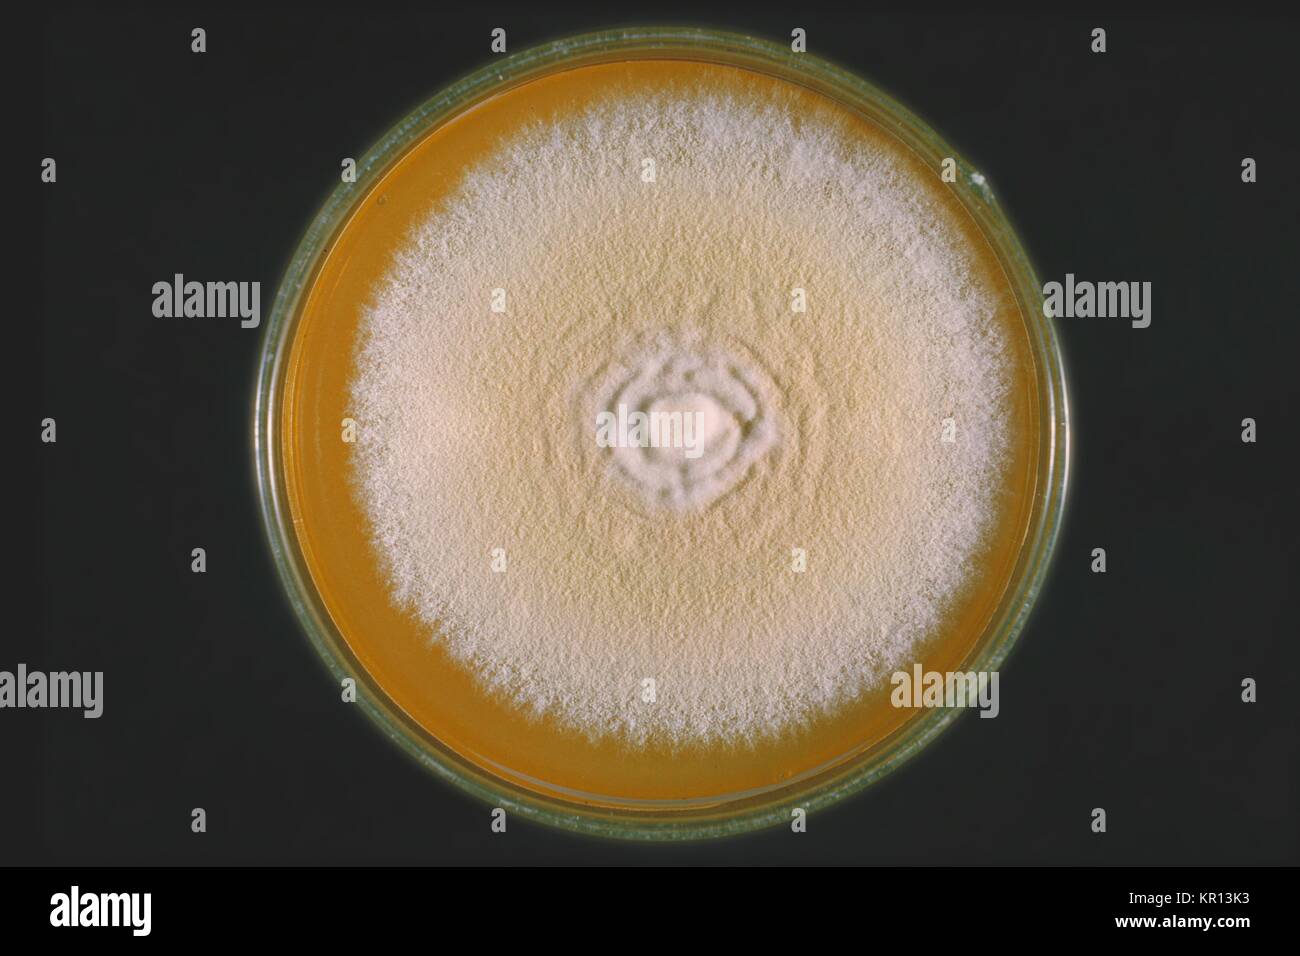 This is a top view of a plate culture containing the fungus Trichophyton mentagrophytes, 1964. From the front, the color is white to bright yellowish-beige or red-violet. The genus Trichophyton inhabits the soil, humans or animals, and is one of the leading causes of hair, skin and nail infections, i.e. dermatophytosis, in humans. Image courtesy CDC. Stock Photo